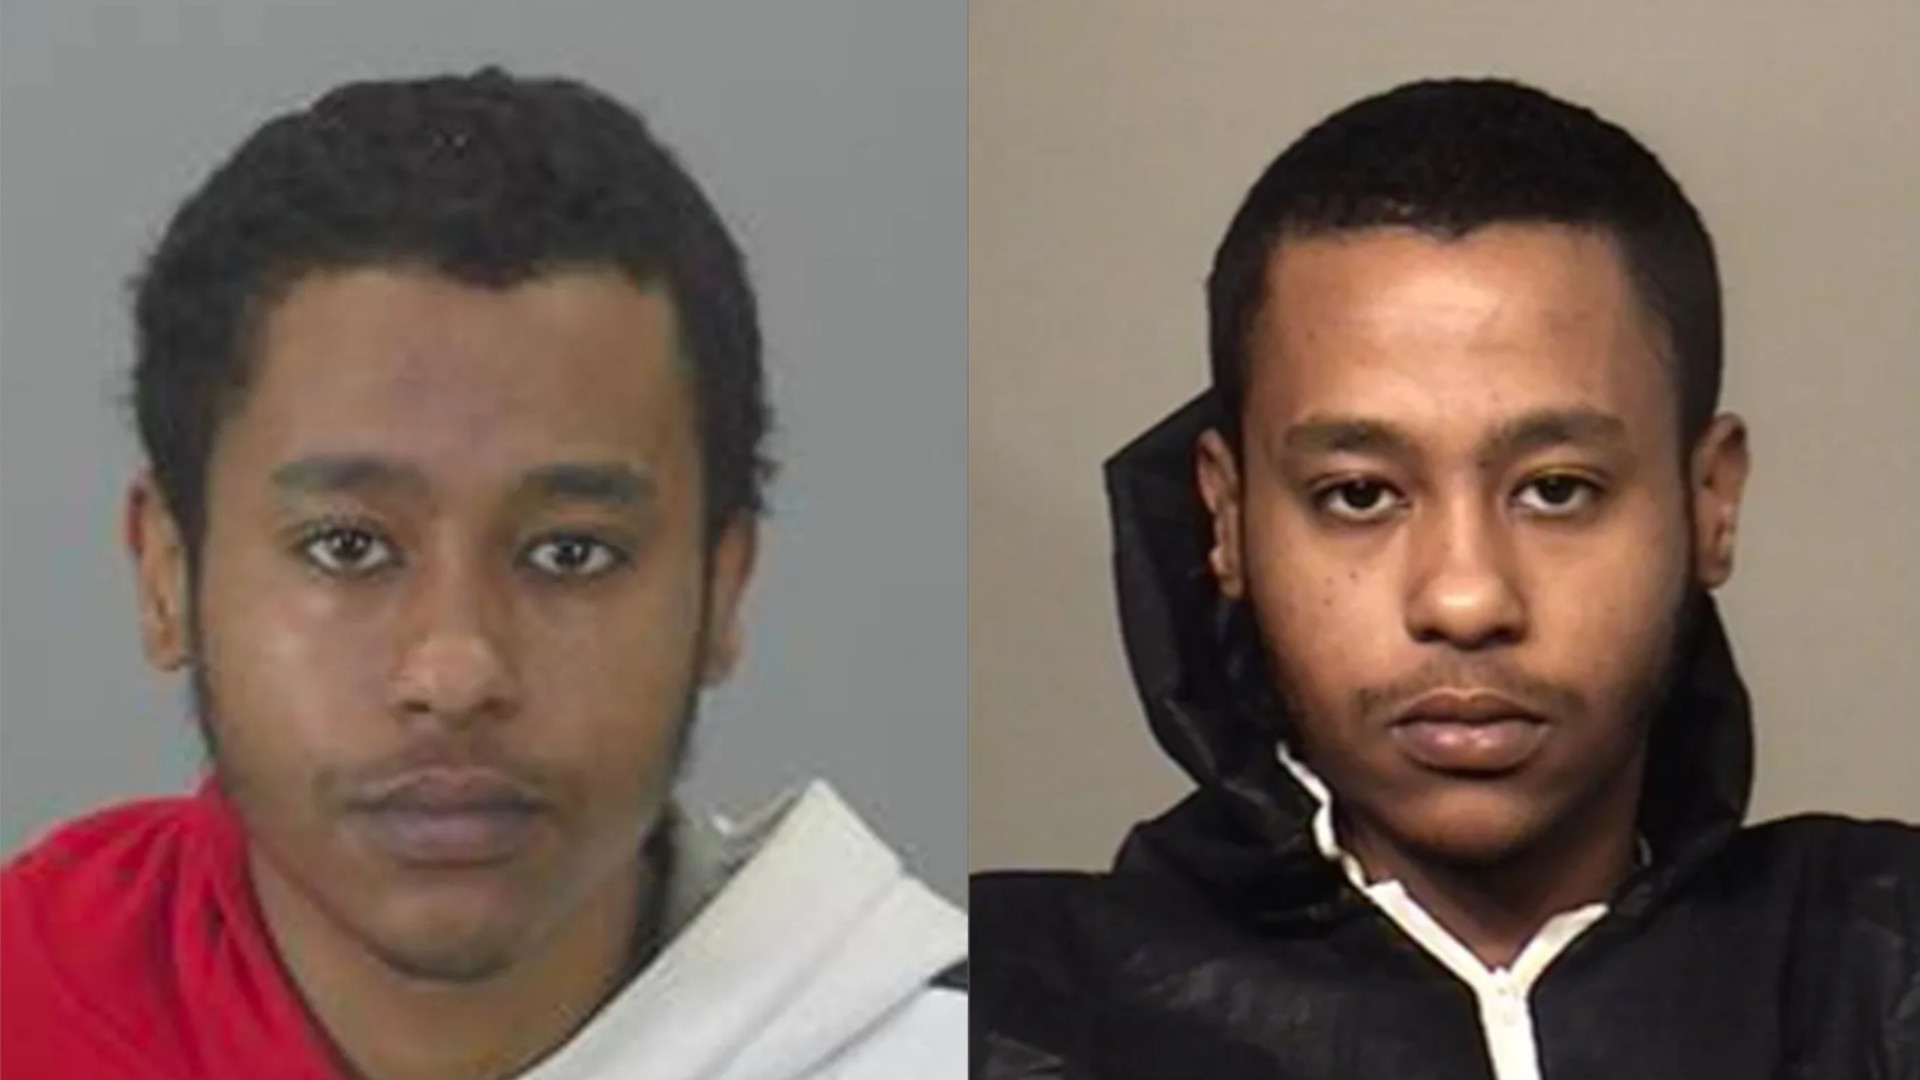 One of Canada’s most wanted arrested in Hamilton, facing murder charge in Kitchener